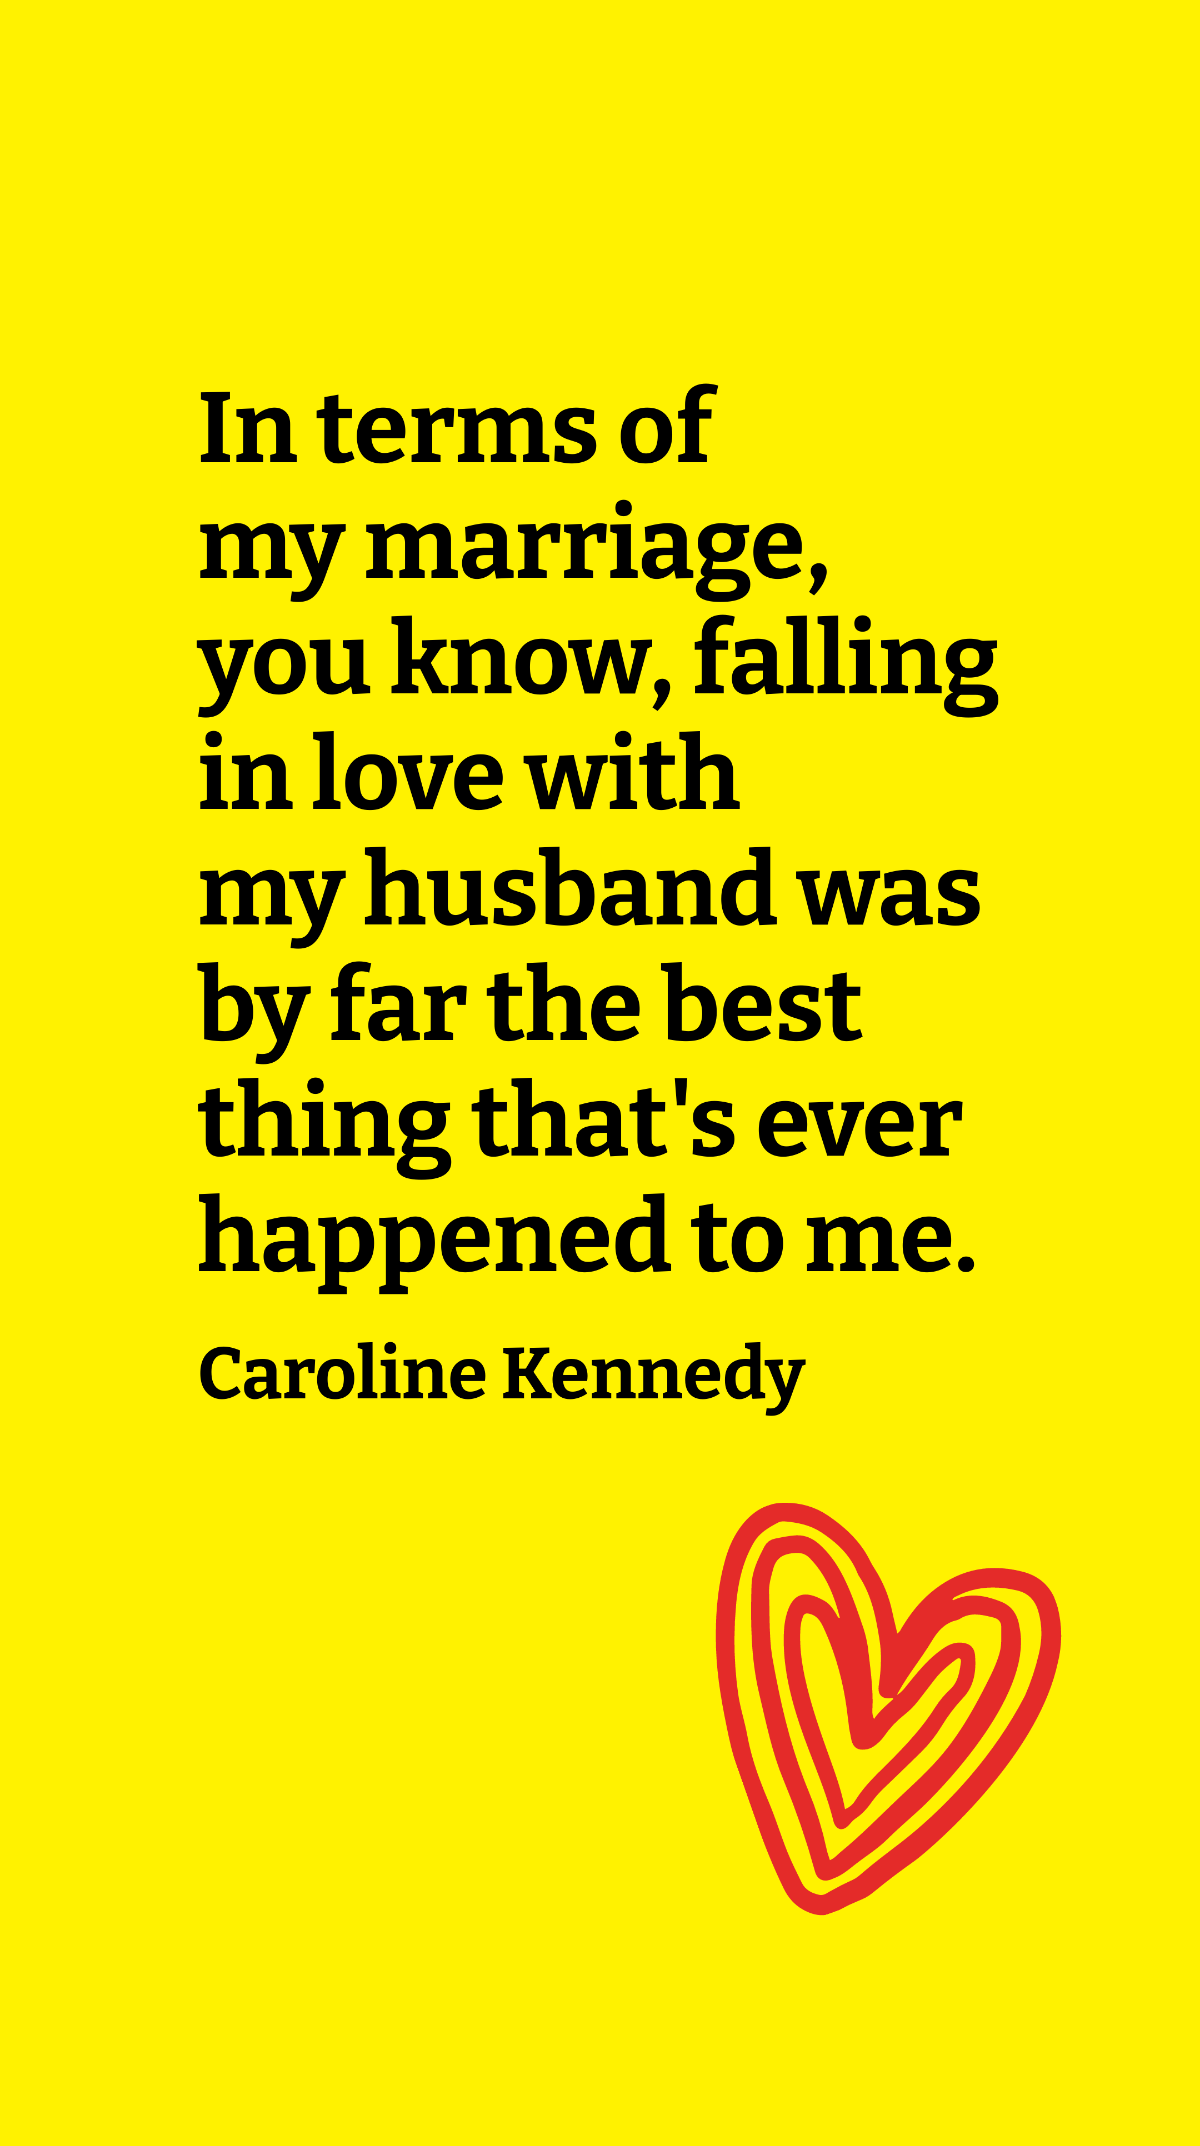 Free Caroline Kennedy - In terms of my marriage, you know, falling in love with my husband was by far the best thing that's ever happened to me. Template